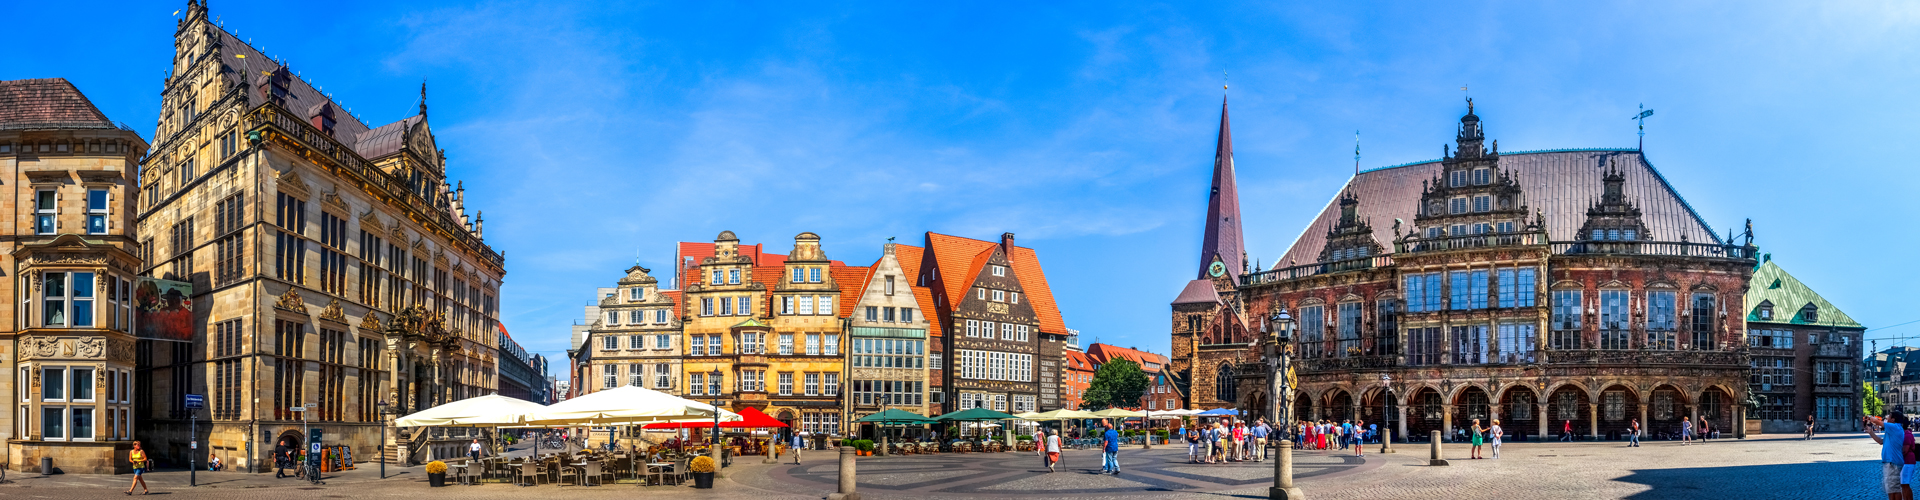 Market with timbered houses in Bremen